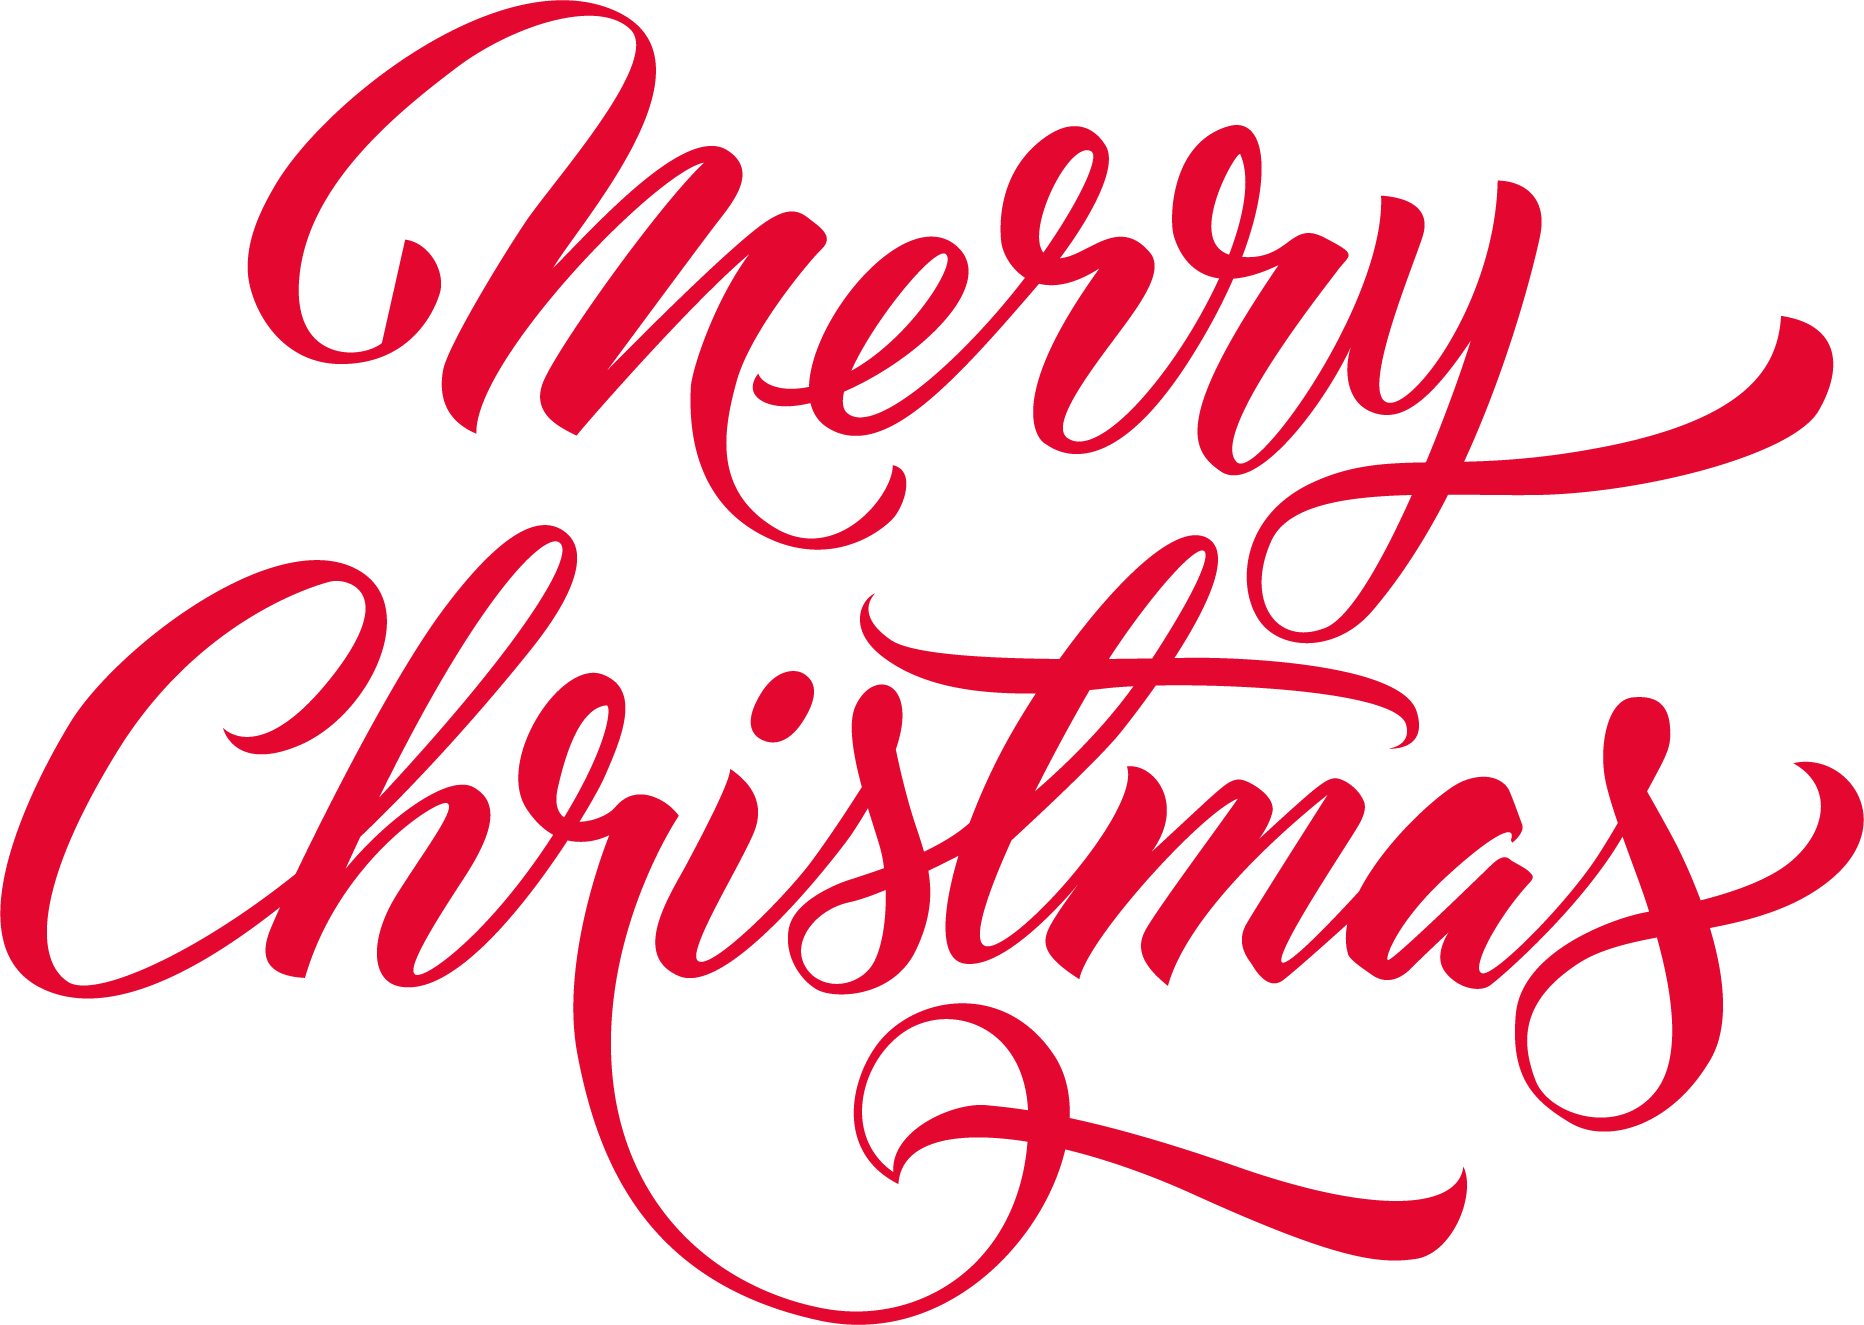 Merry Christmas Text Red PNG Image in High Definition Transparent pngteam.com